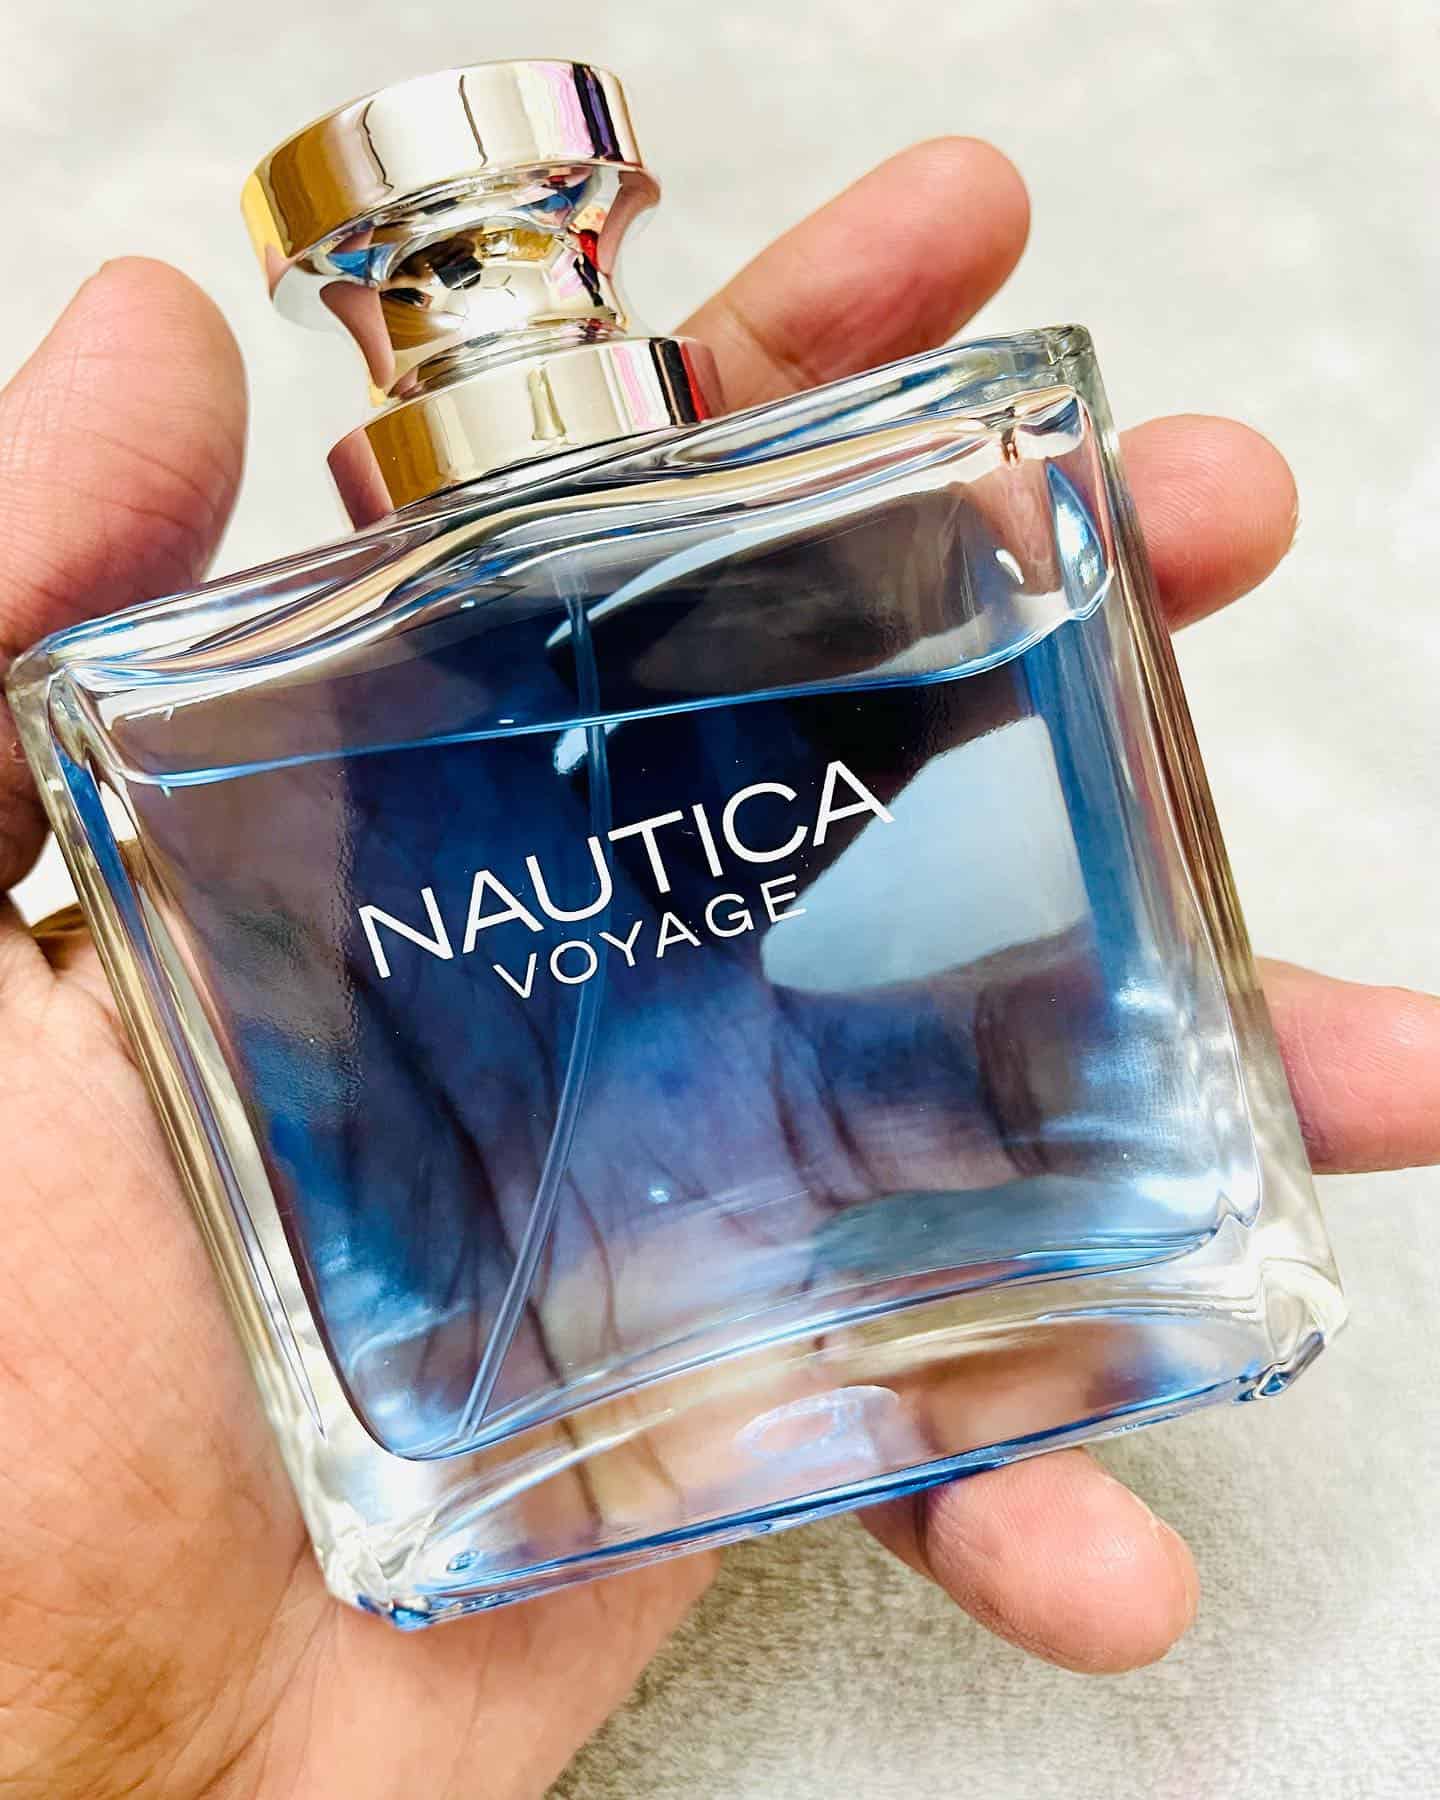 holding a bottle of nautica voyage